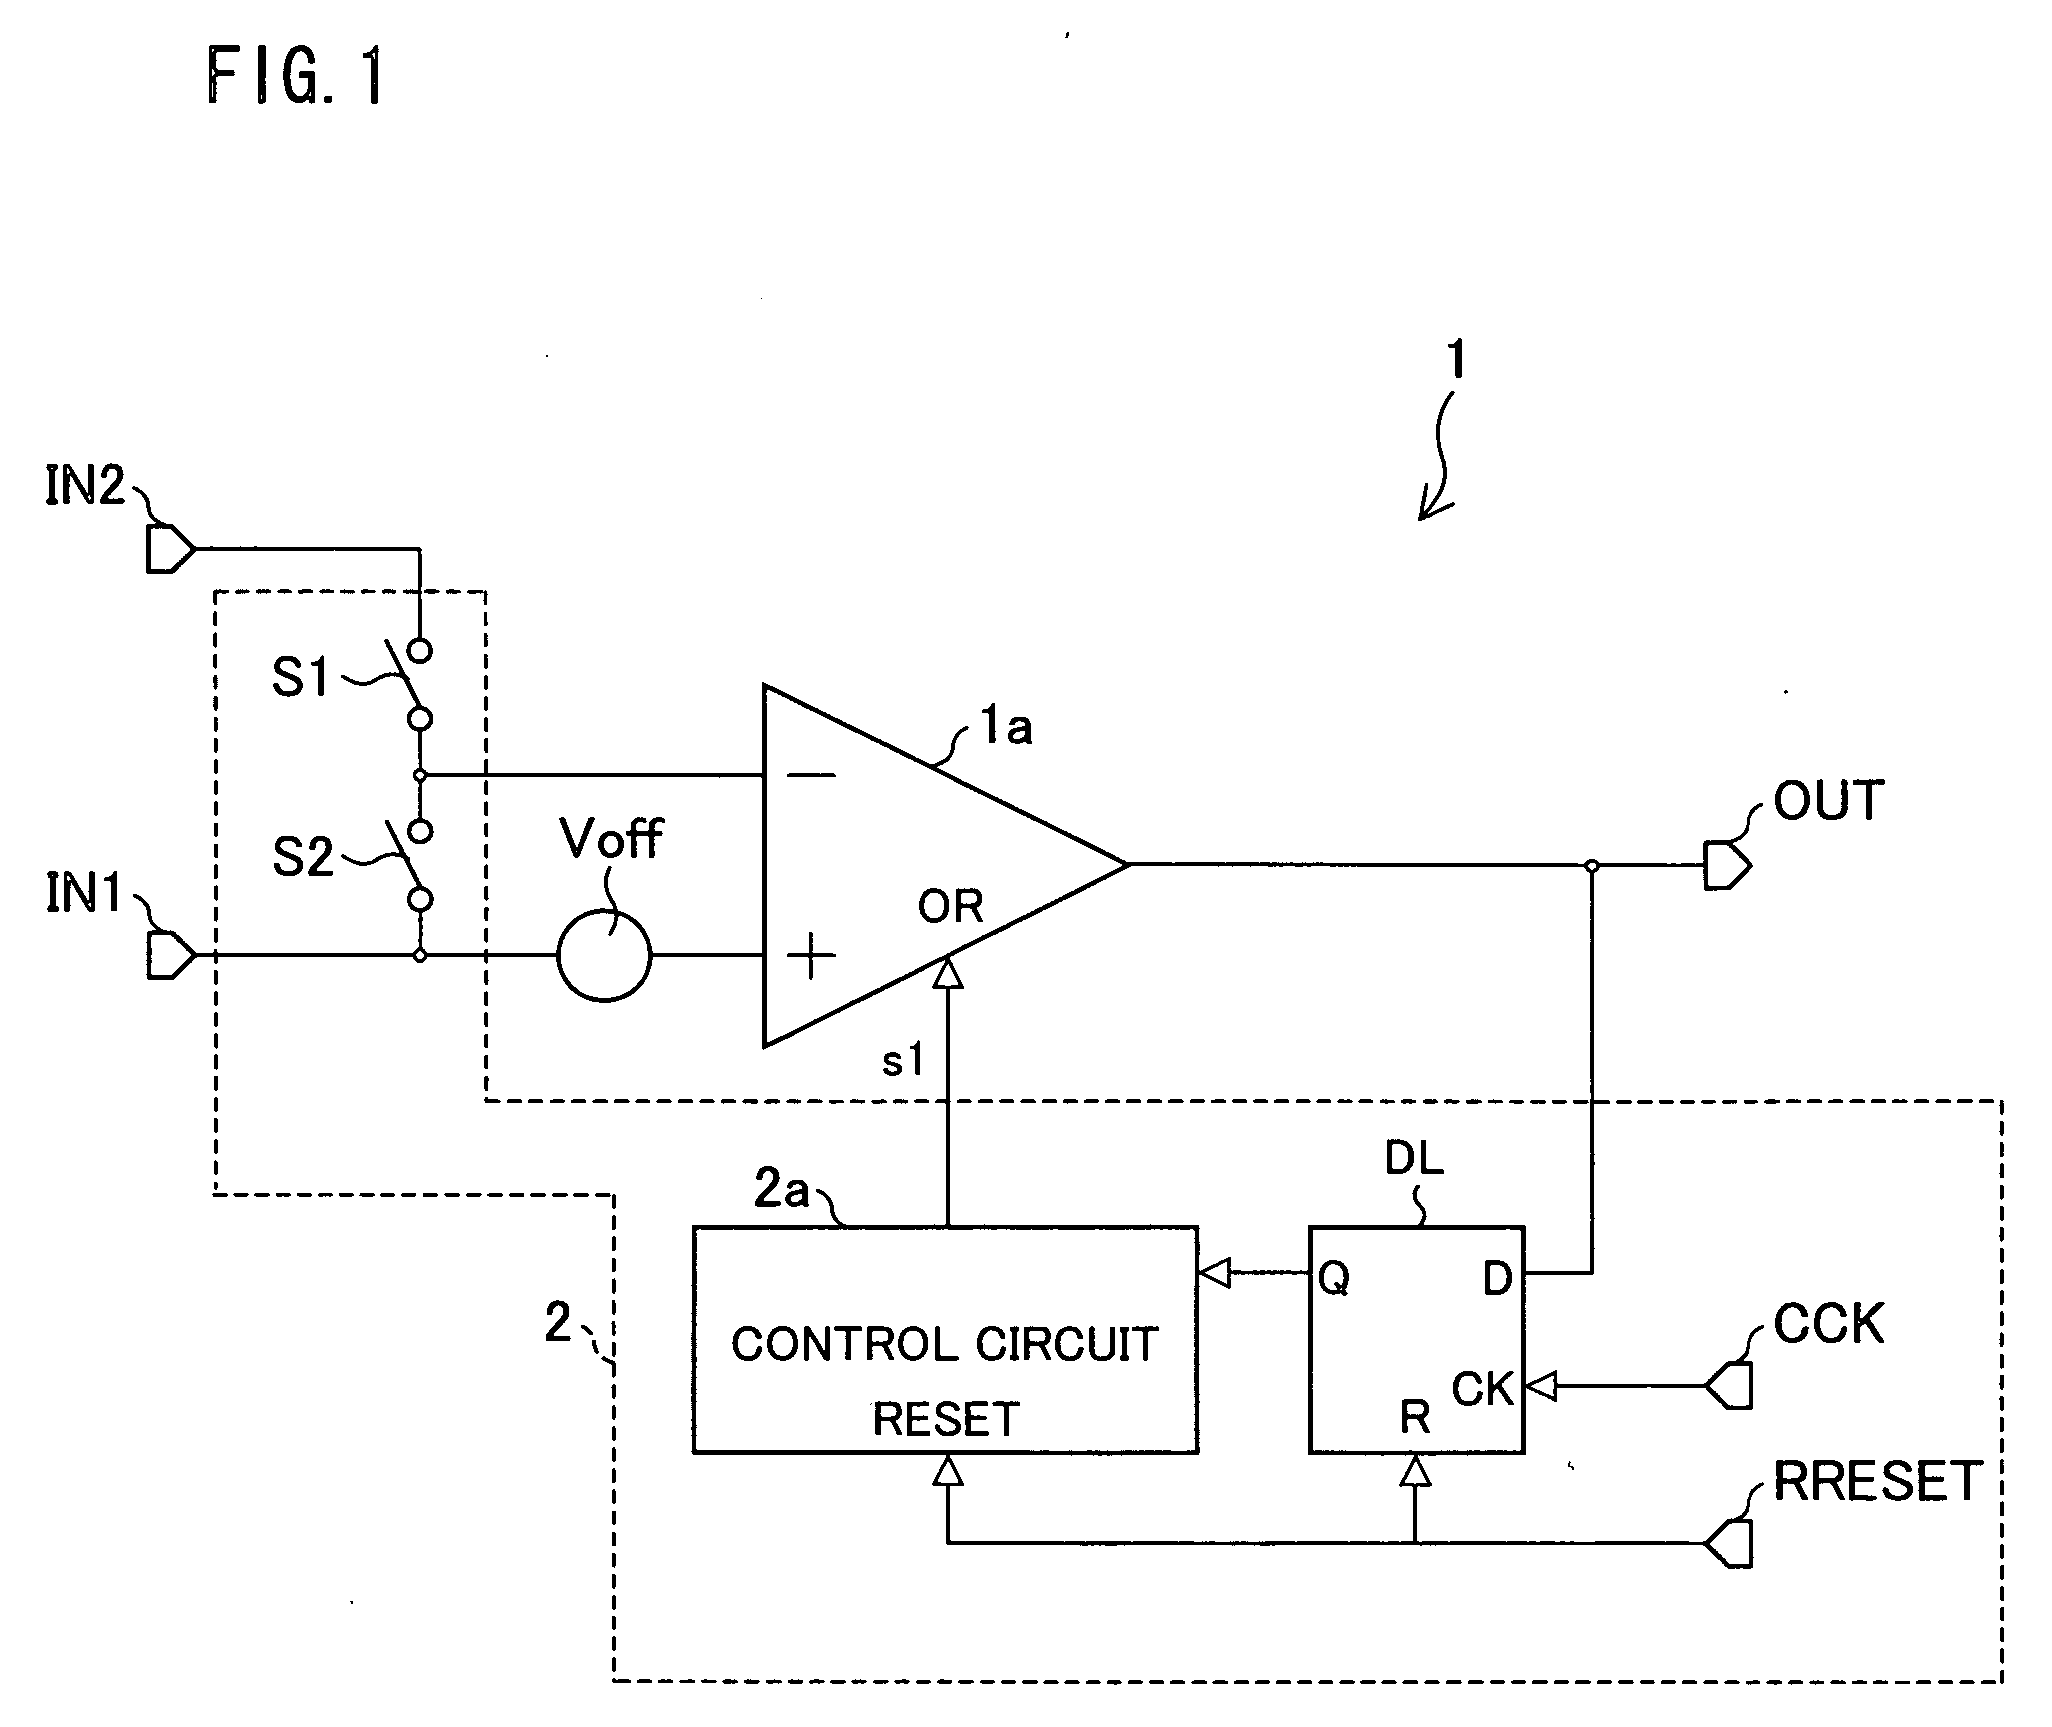 Offset adjusting circuit and operational amplifier circuit